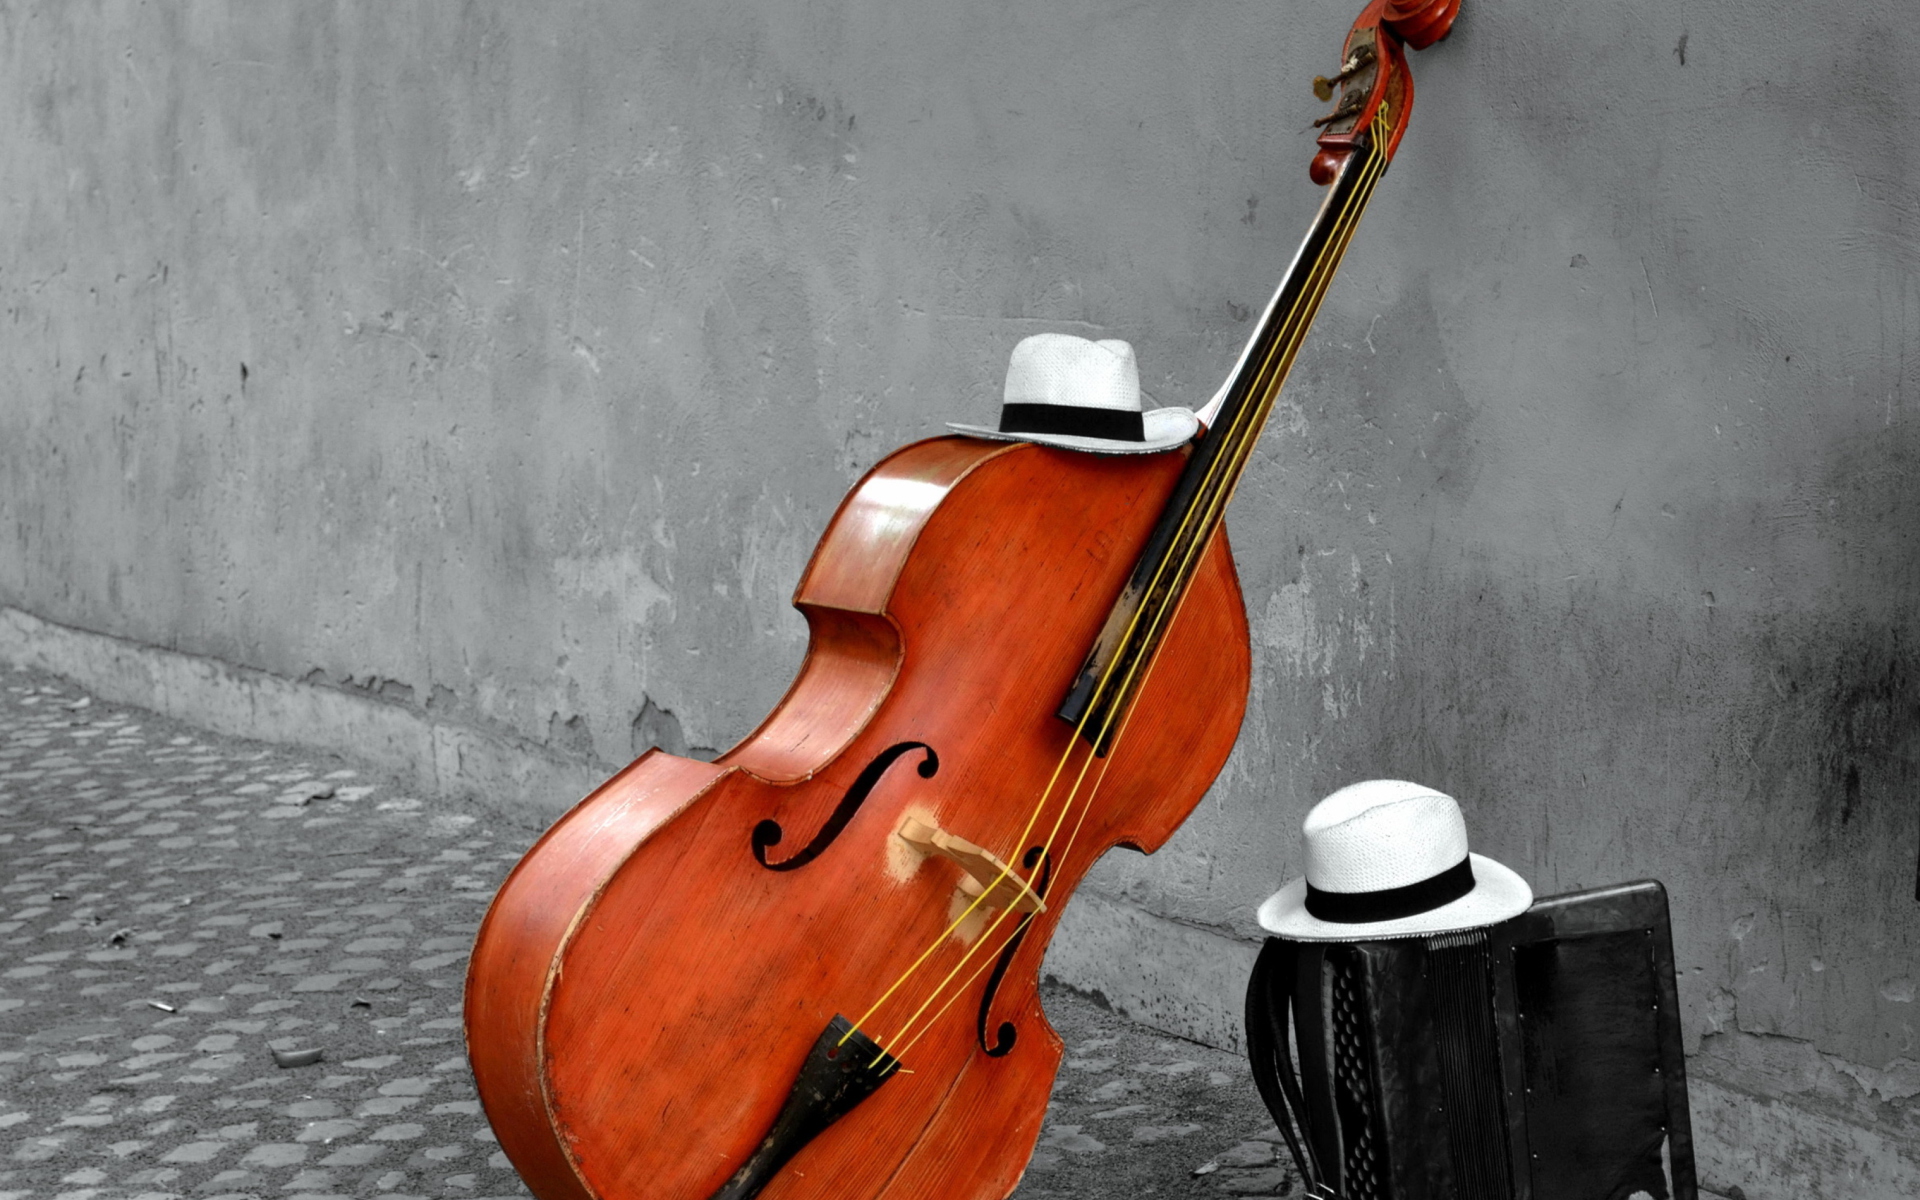 Contrabass And Hat On Street wallpaper 1920x1200